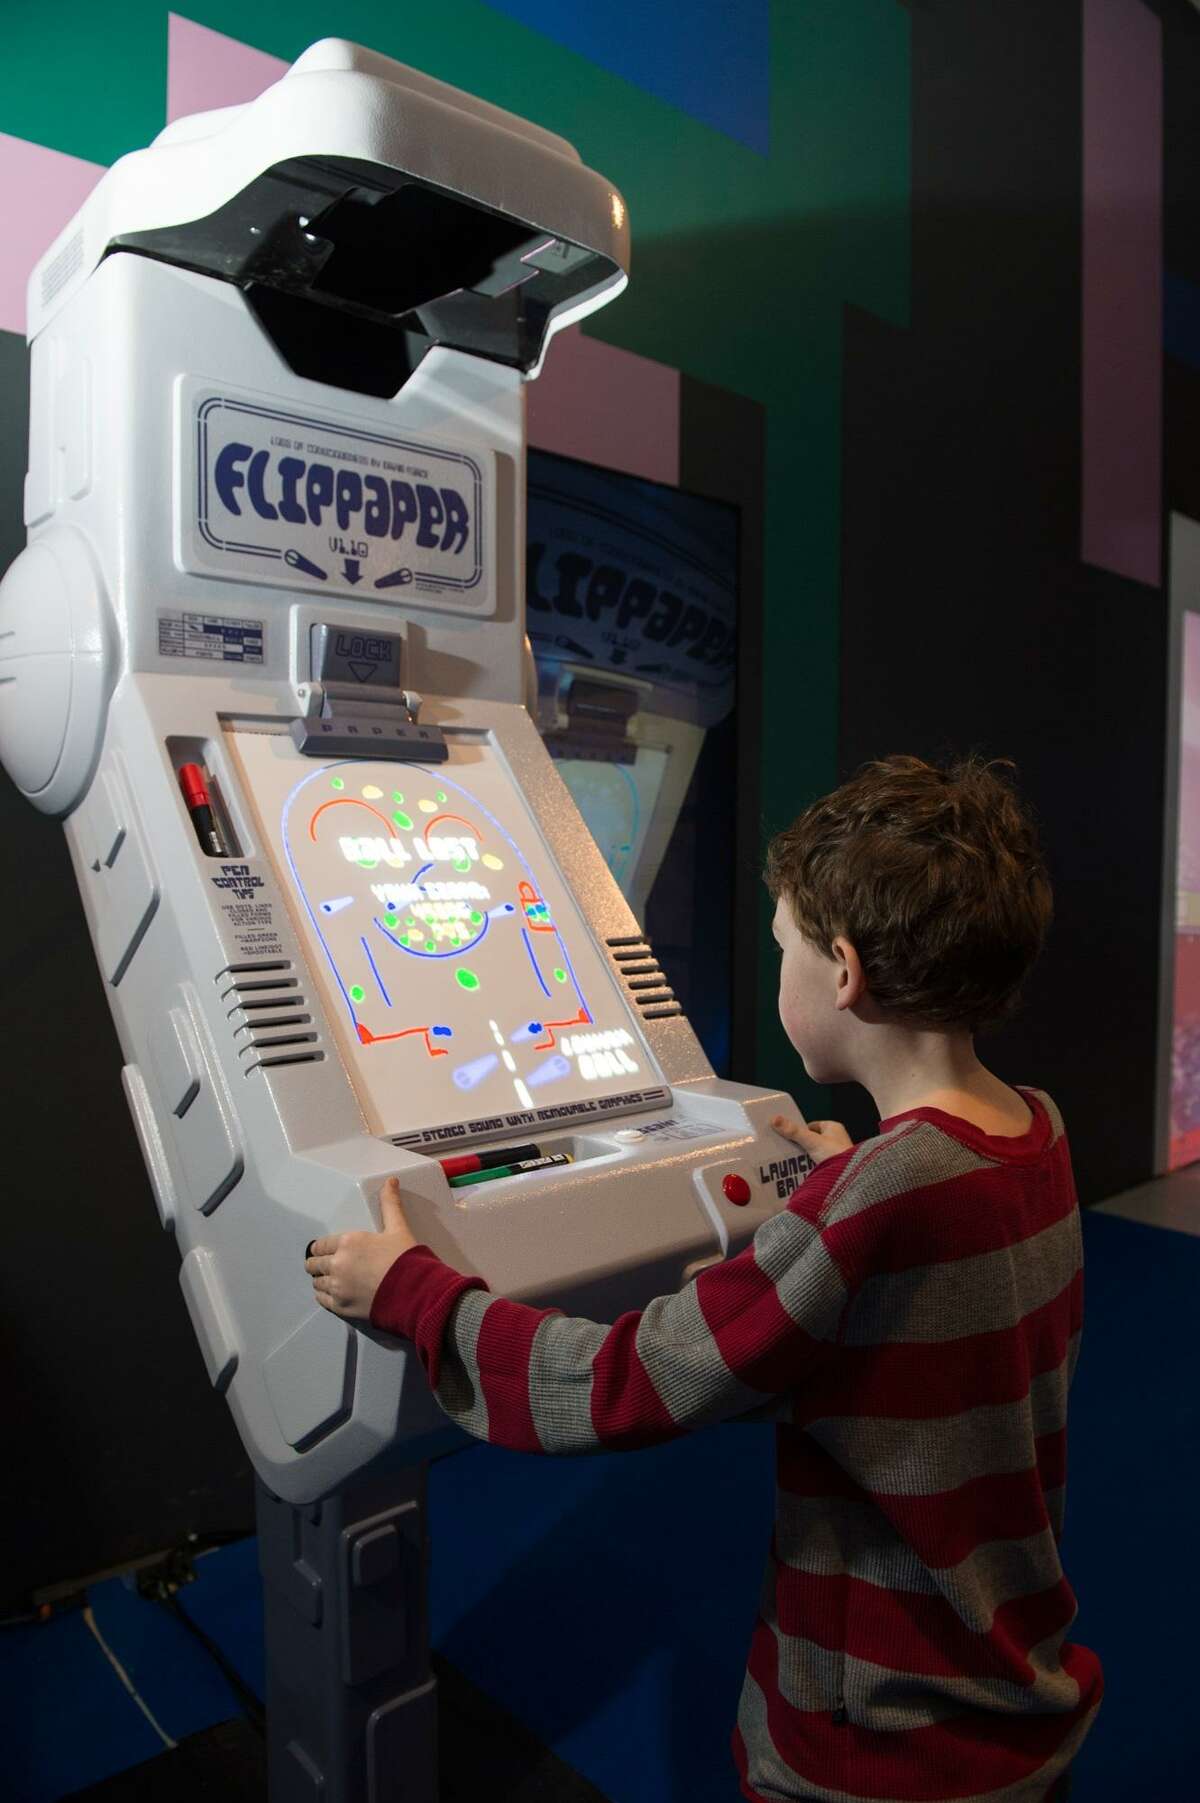 The exhibit "DigiPlaySpace" is part of the DoSeum's Summer of Tech programming. The DoSeum has free admission from 5:30-7:30 p.m. the first and third Tuesdays of each month.